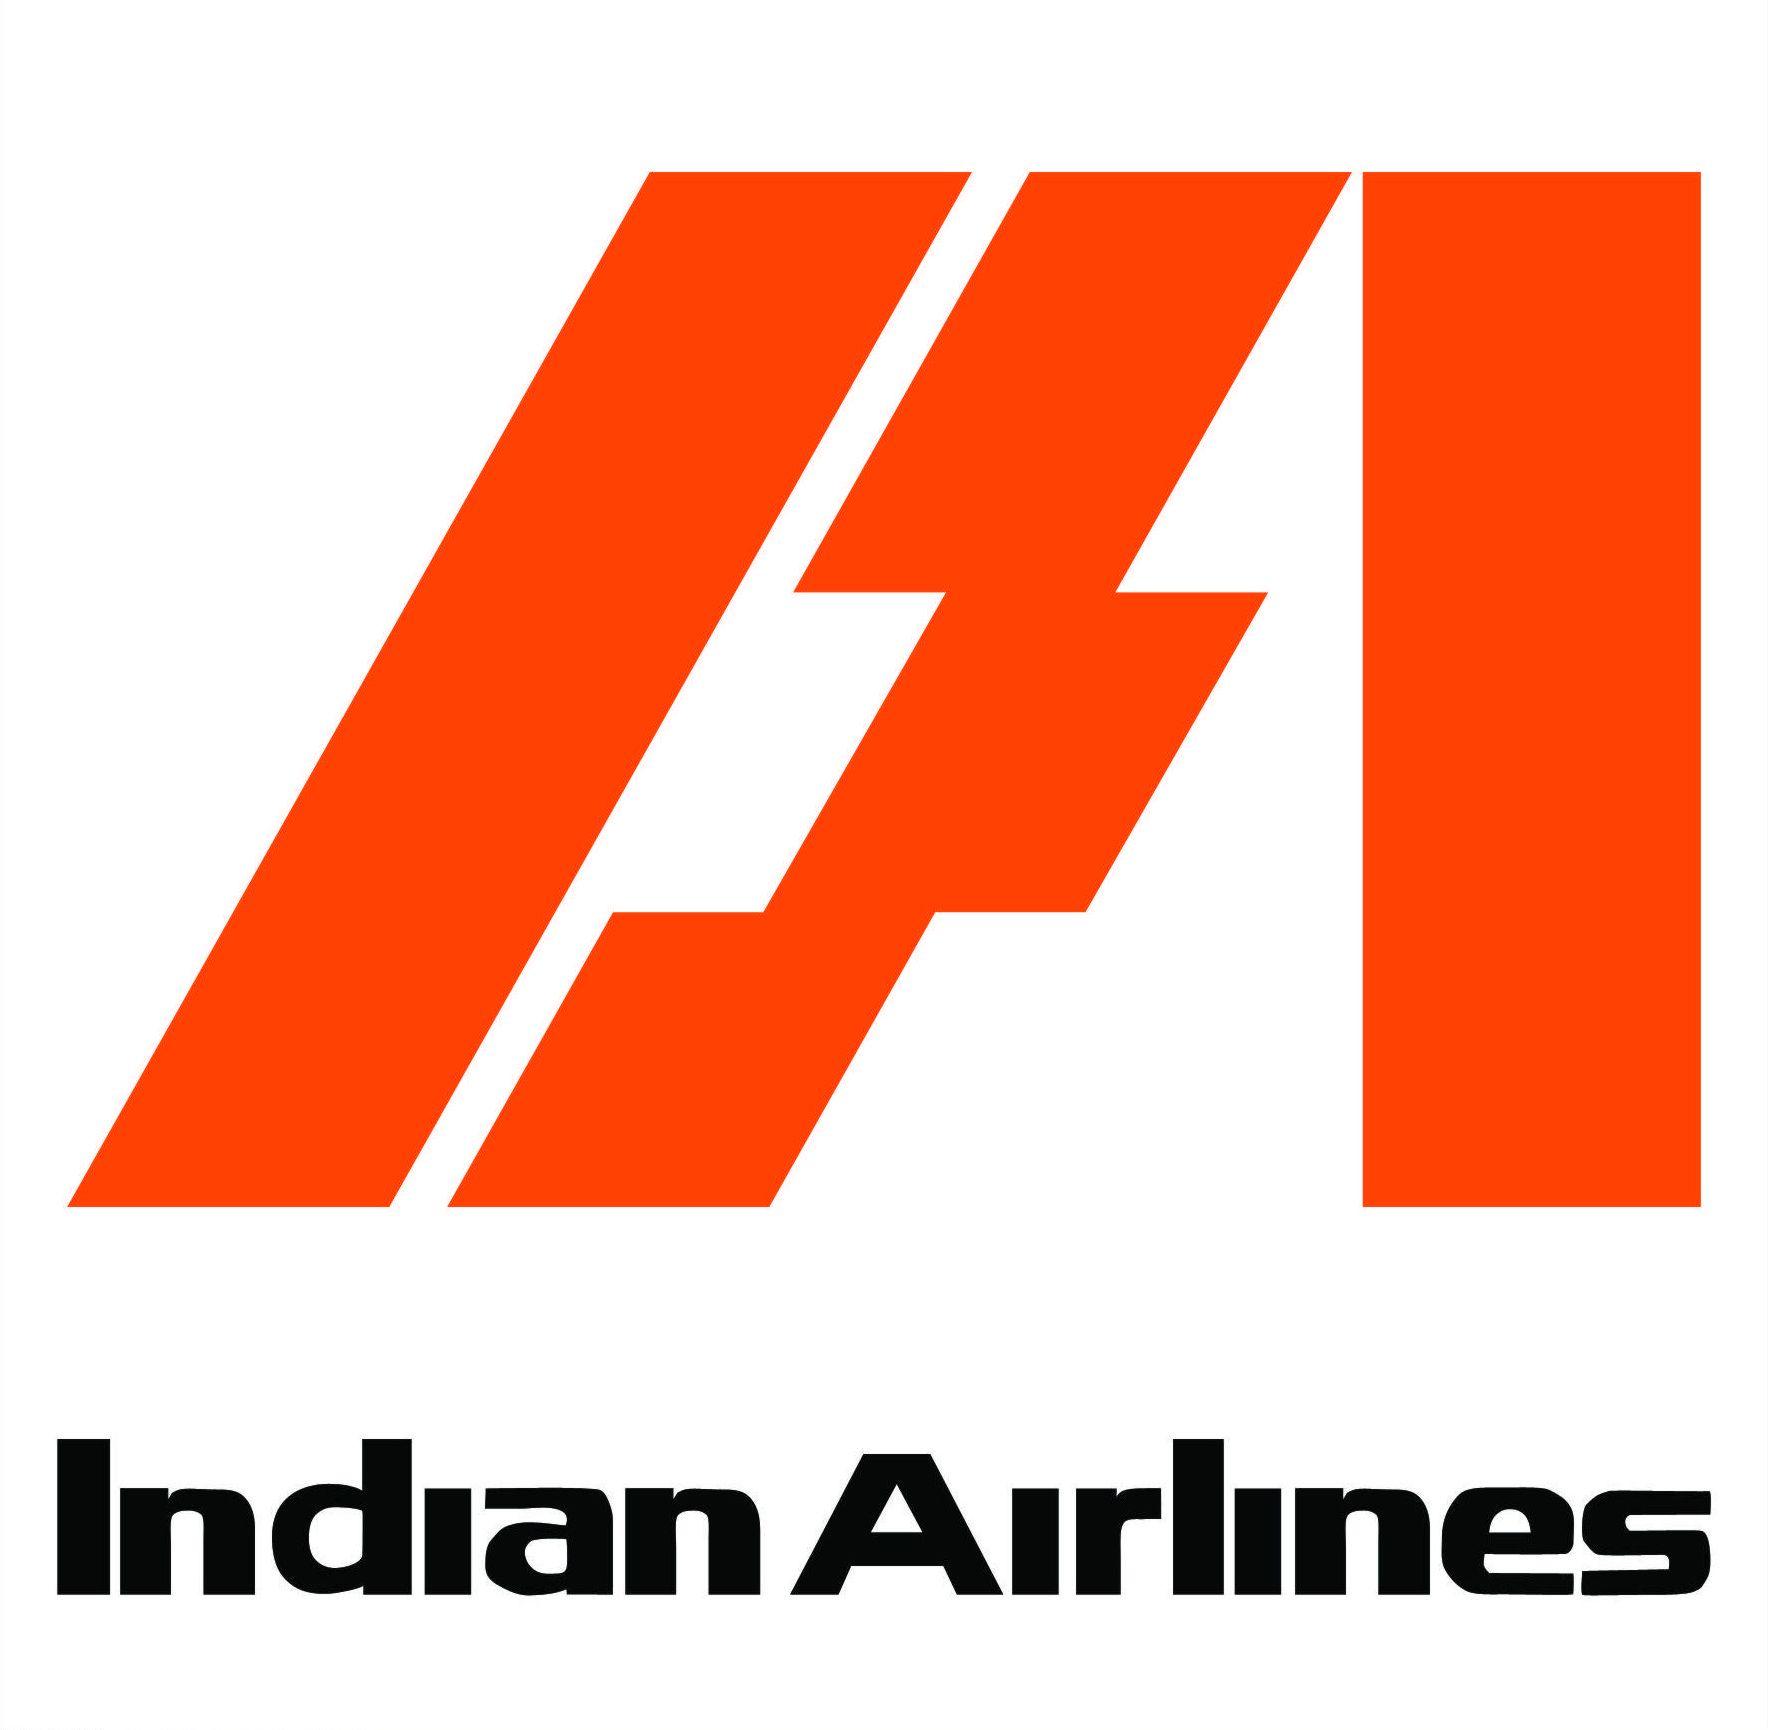 Indian Airways Logo - 1953, Indian Airlines, New Delhi, India #IndianAirlines (L14473 ...